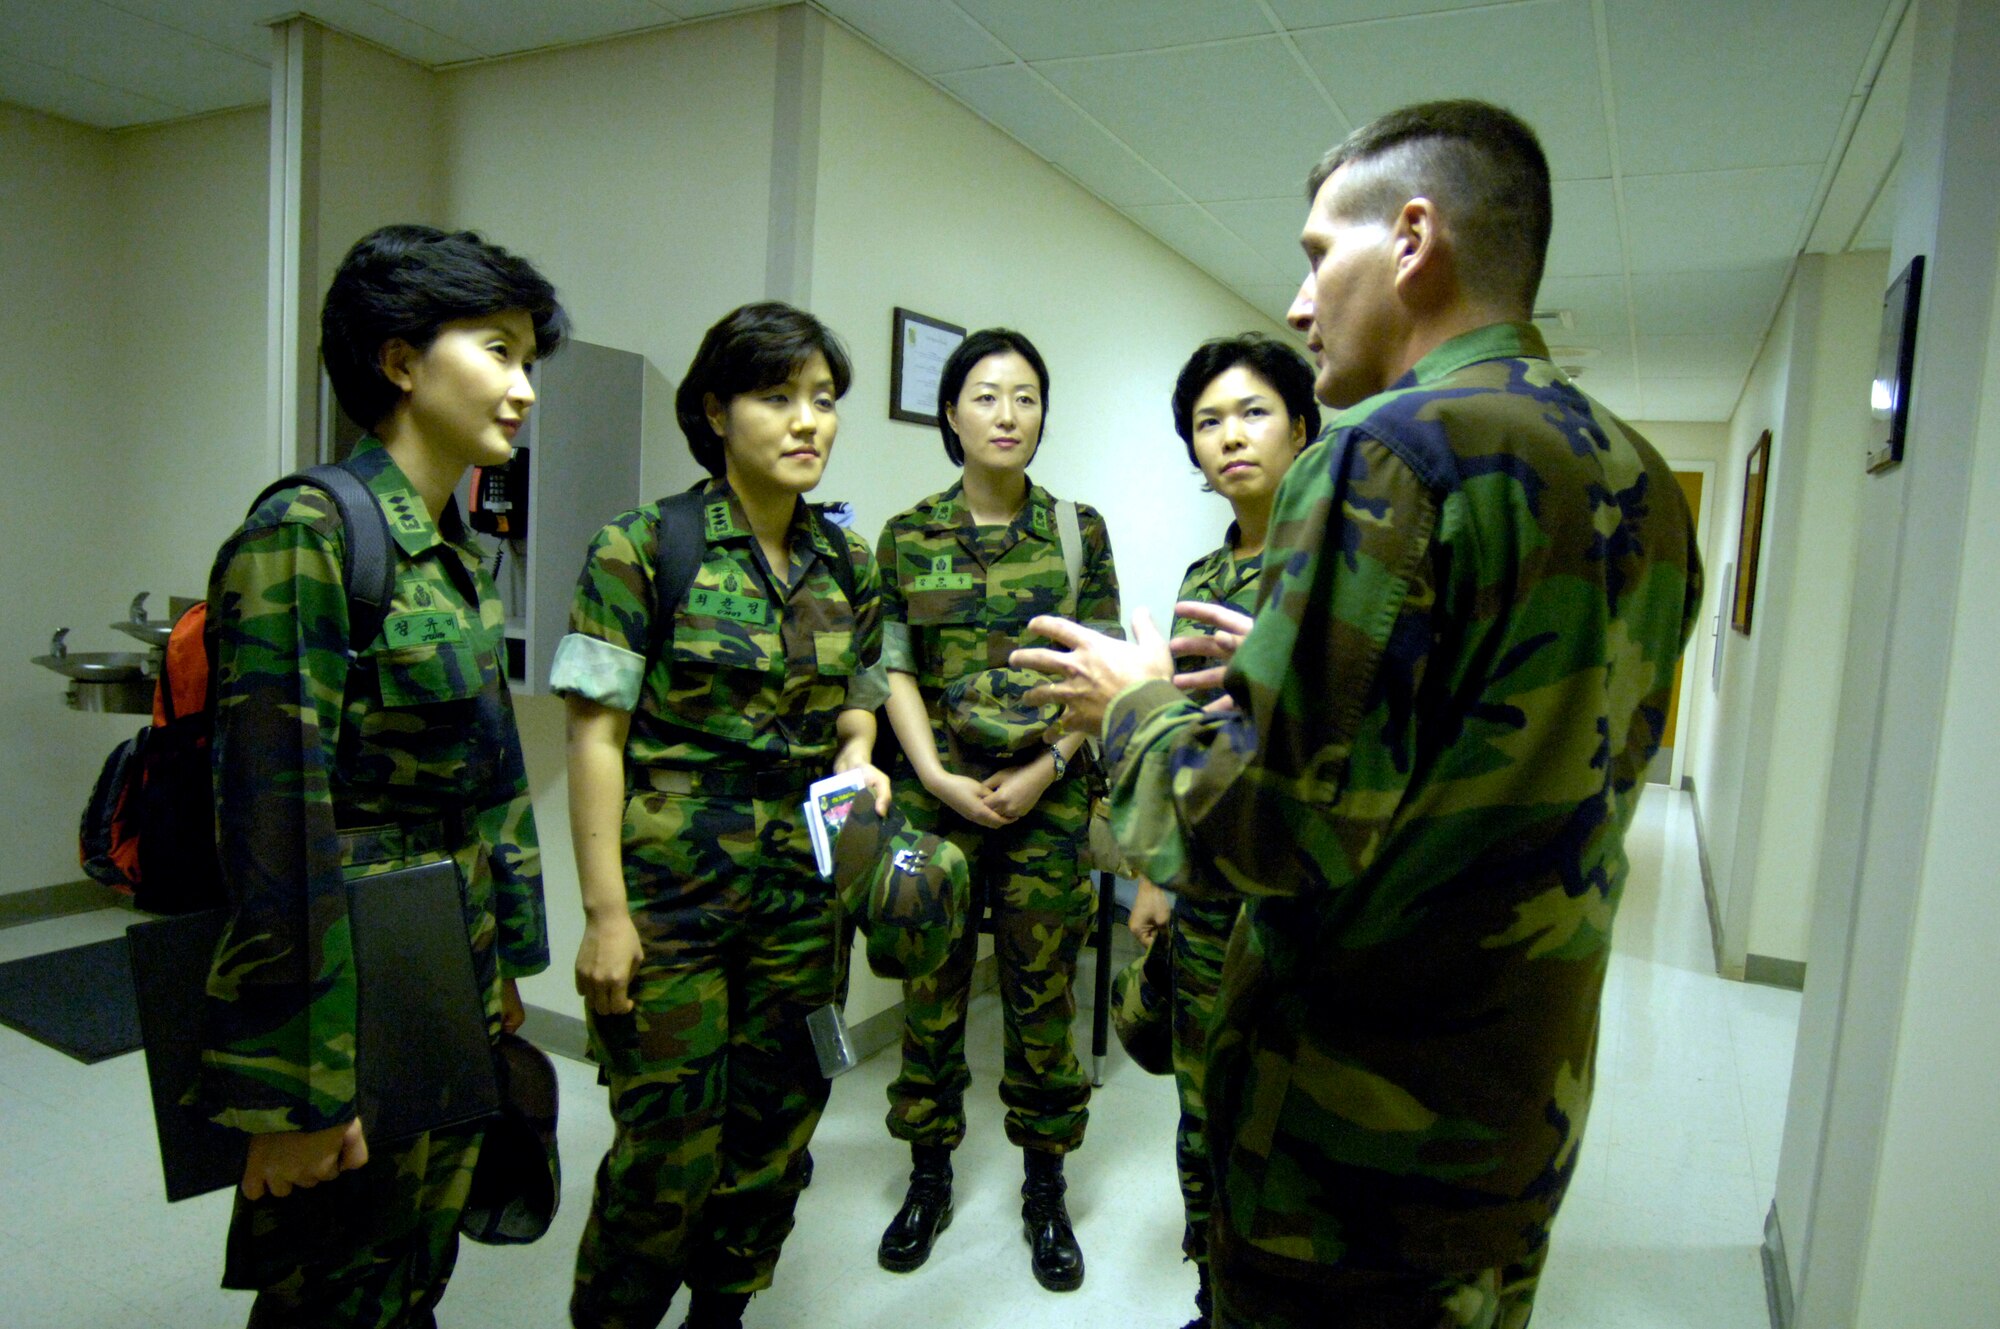 Lt. Col. David Beavers explains the operation of the William R. Schick Clinic to four visiting South Korean Air Force nurses at Hickam Air Force Base, Hawaii, on Tuesday, April 25, 2006. South Korea sent seven nurses to the island to discuss mass casualty response, civil-military coordination and biohazard response procedures for natural disaster management. The colonel is the chief nurse at the clinic and is assigned to the 15th Medical Group. (U.S. Air Force photo/Tech. Sgt. Shane A. Cuomo)